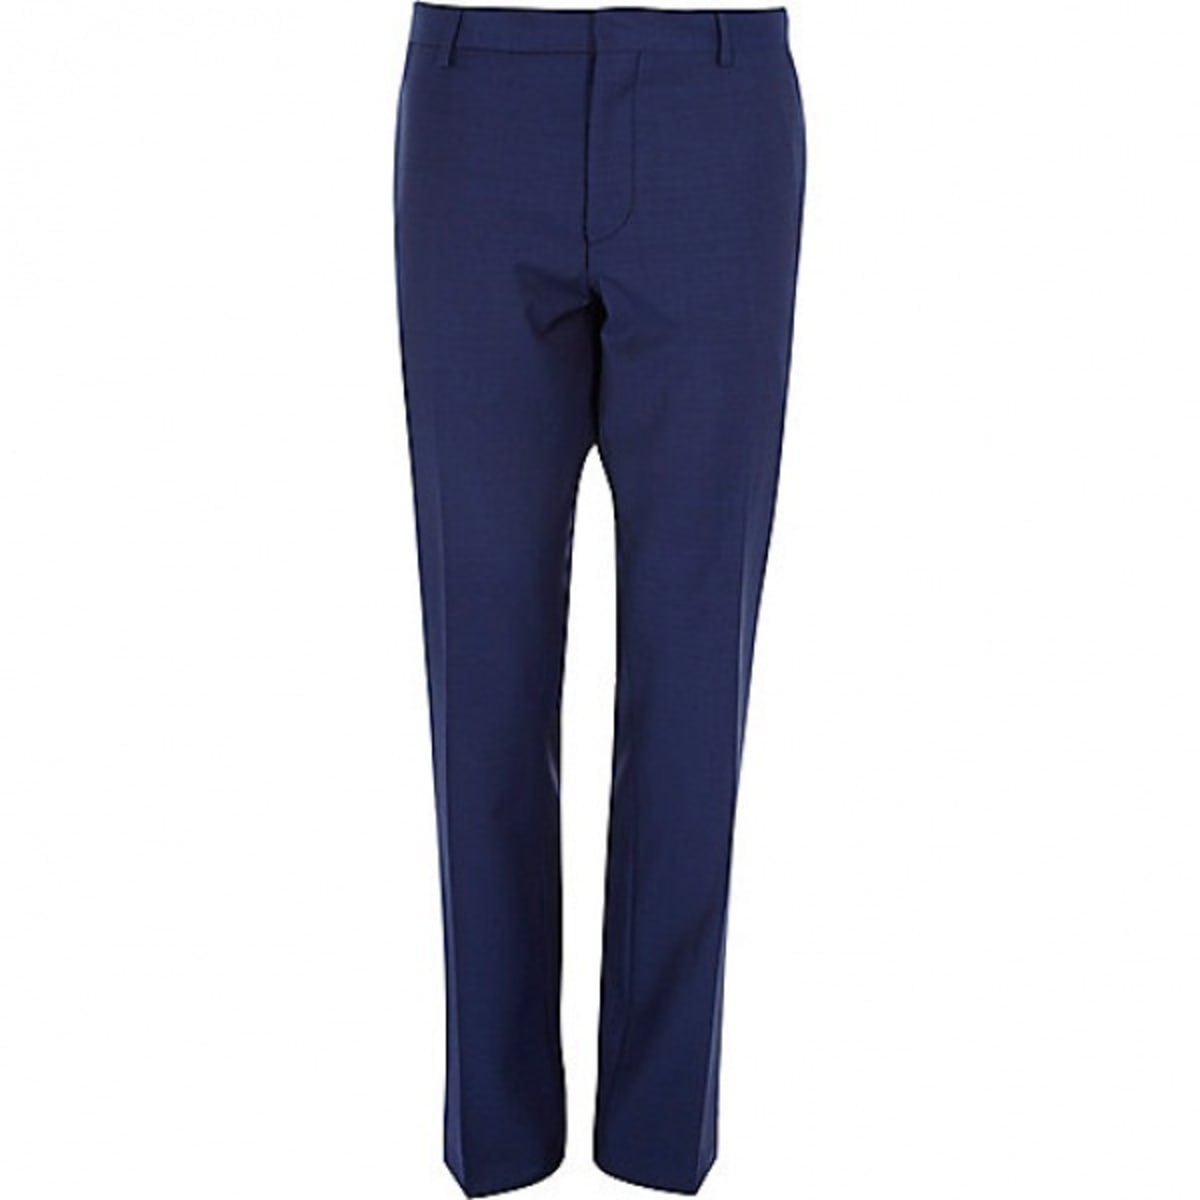 Buy Navy blue Trousers & Pants for Men by BEYOURS Online